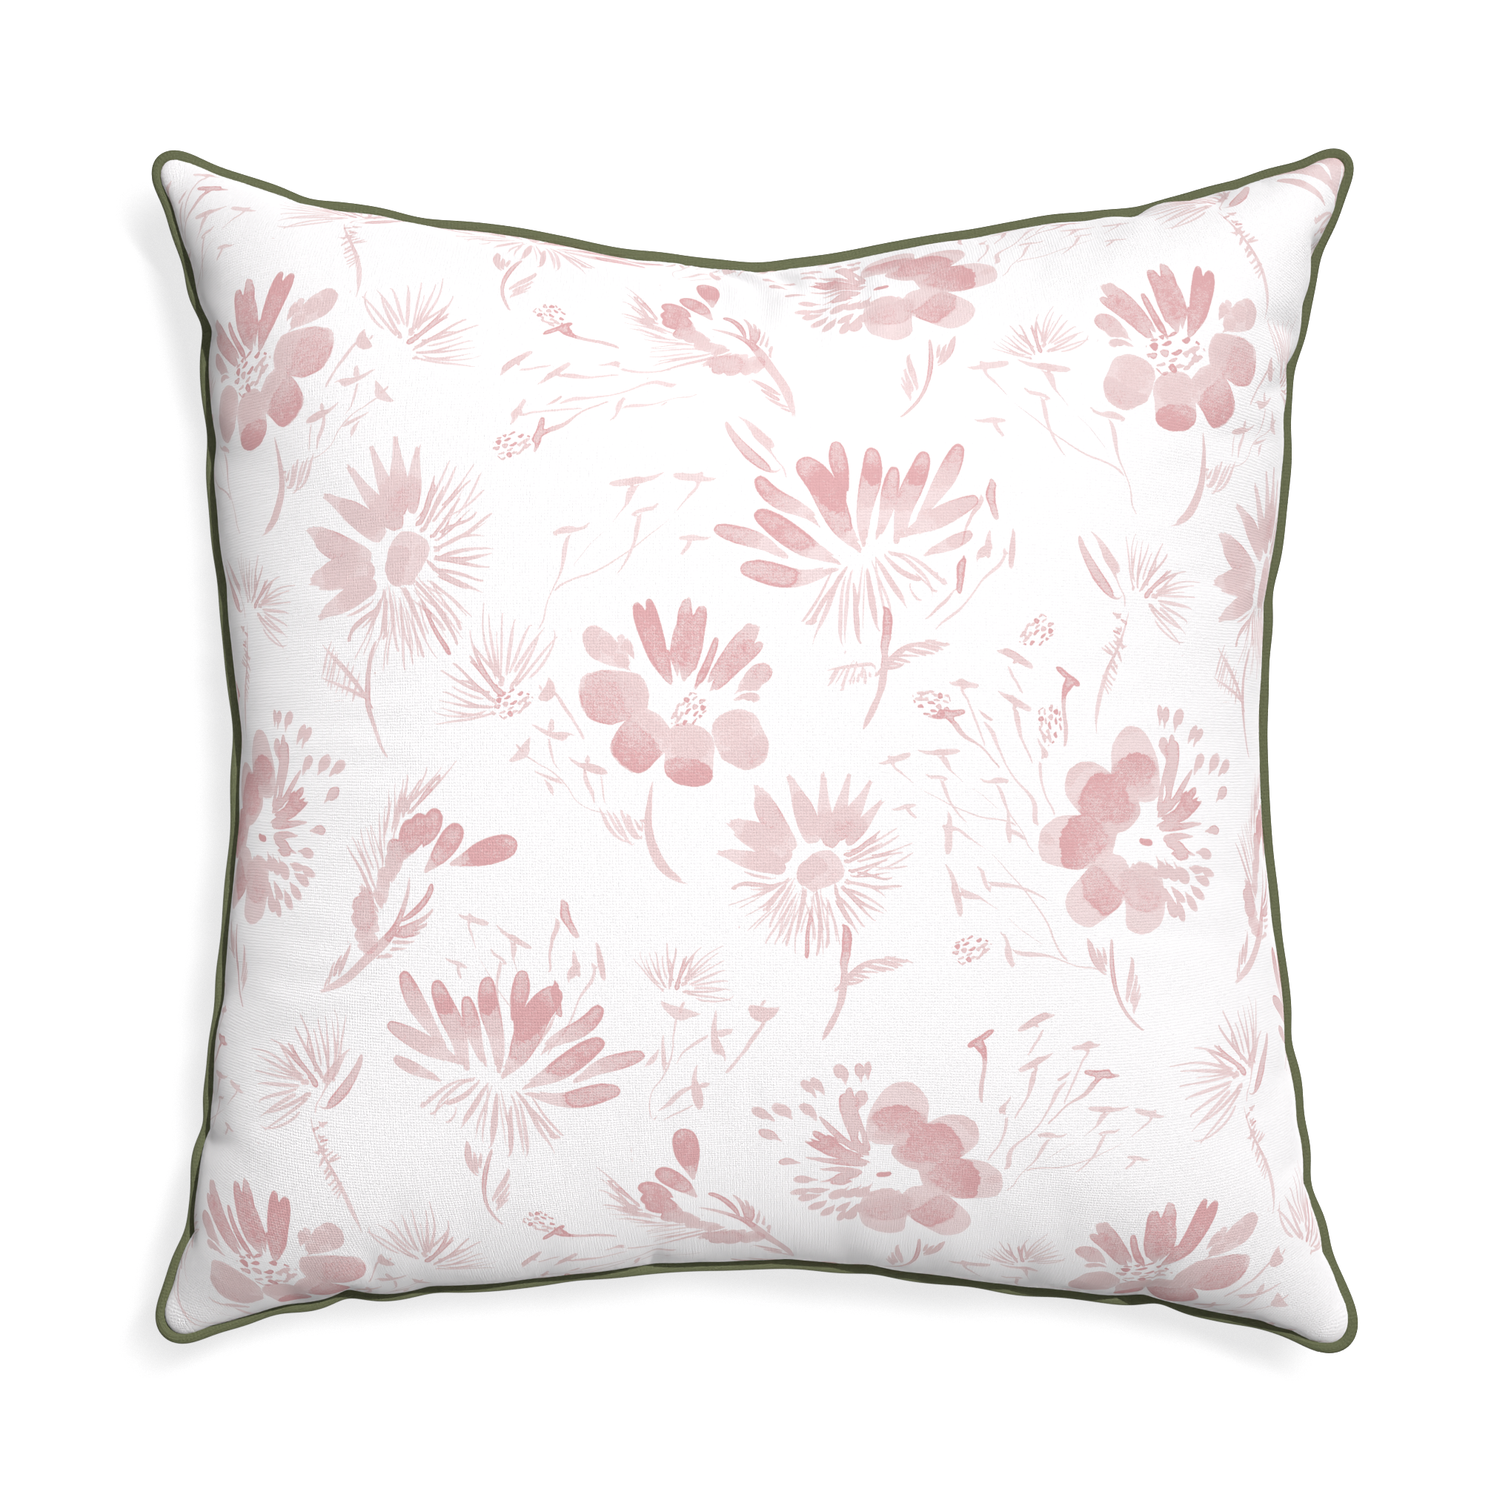 Euro-sham blake custom pink floralpillow with f piping on white background